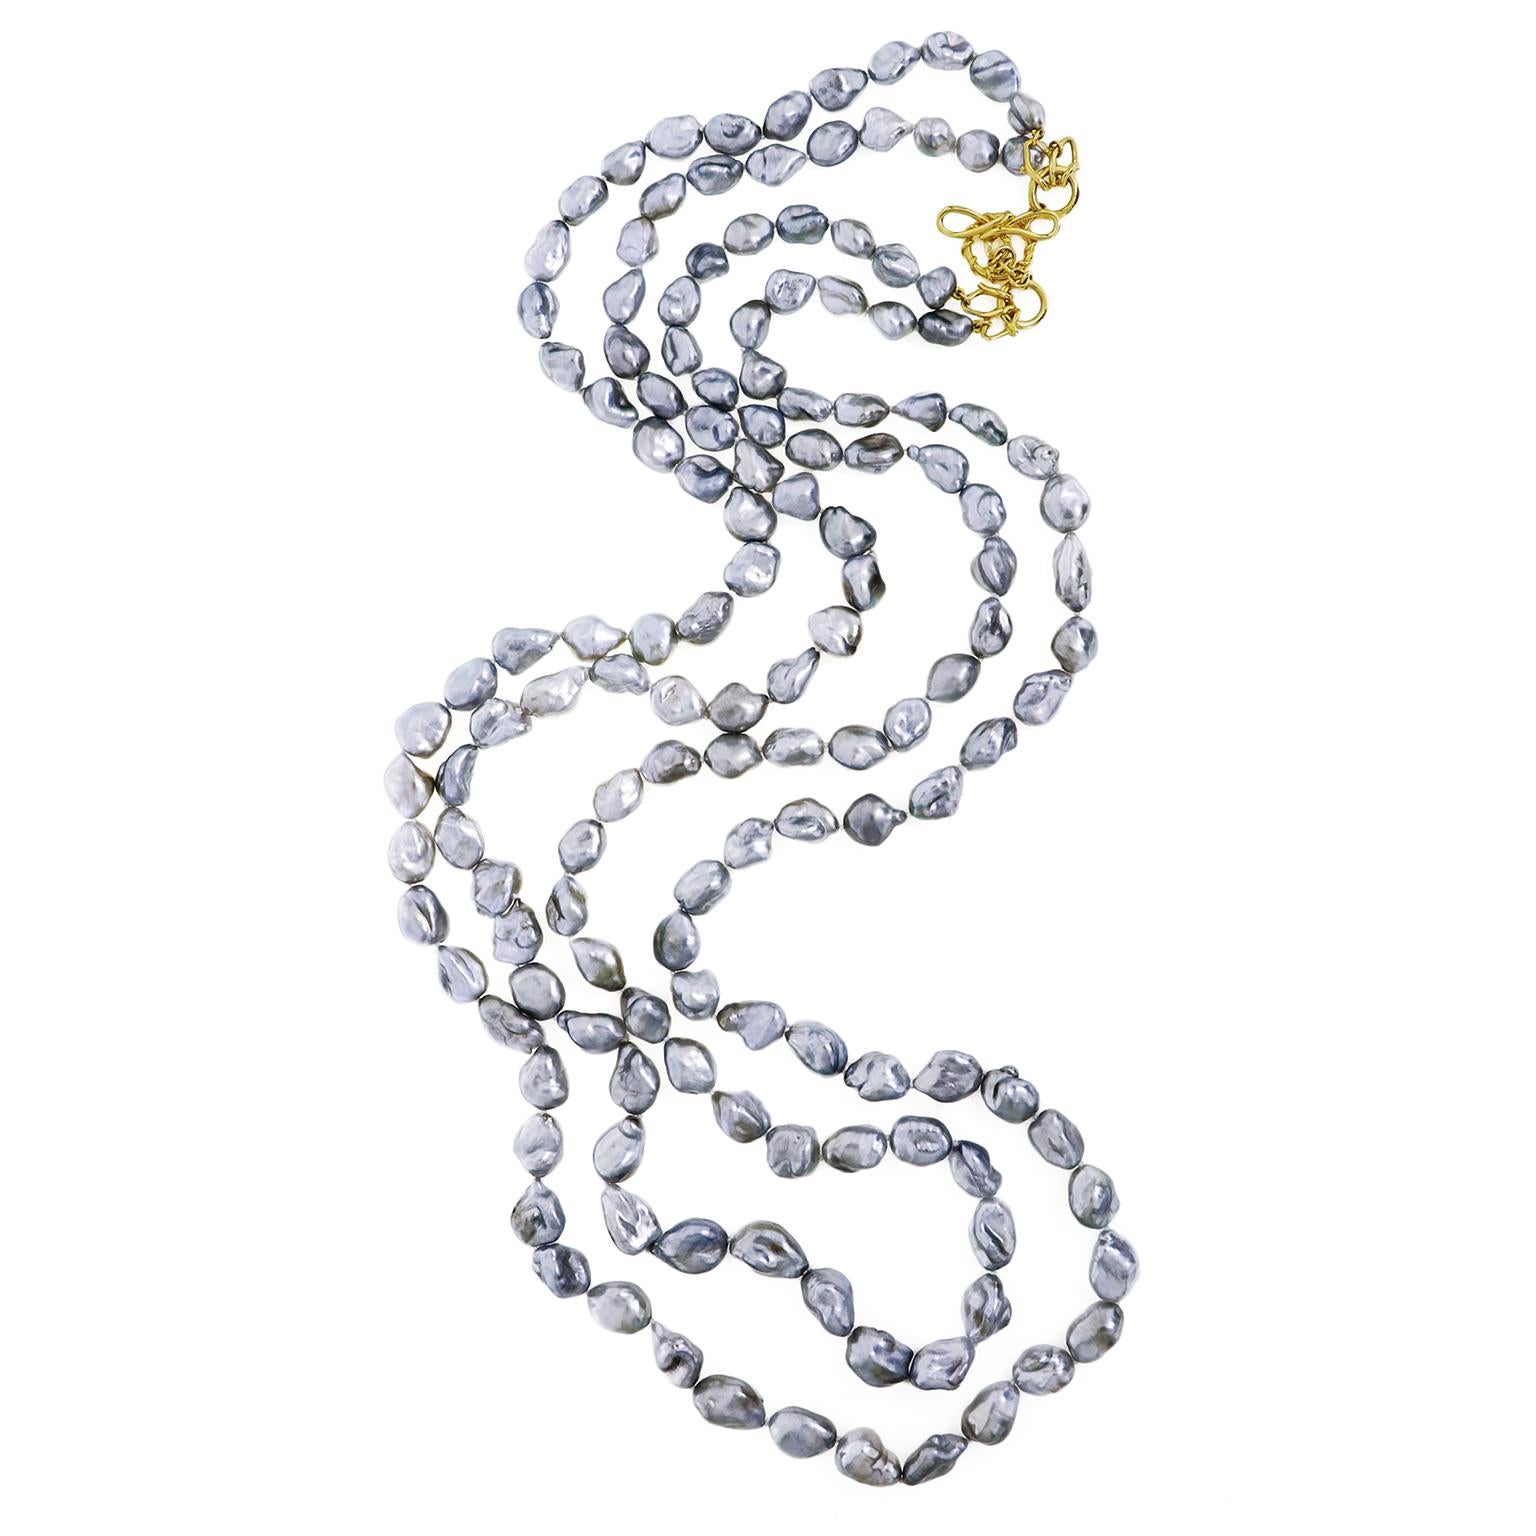 Showcasing the grey keshi pearl, 2 strands of this baroque shaped gemstone are arranged largest in the middle and descend in size towards the ends. Light catches these nacre pearls, which allows them to radiate. 18k yellow gold Vs unify the two